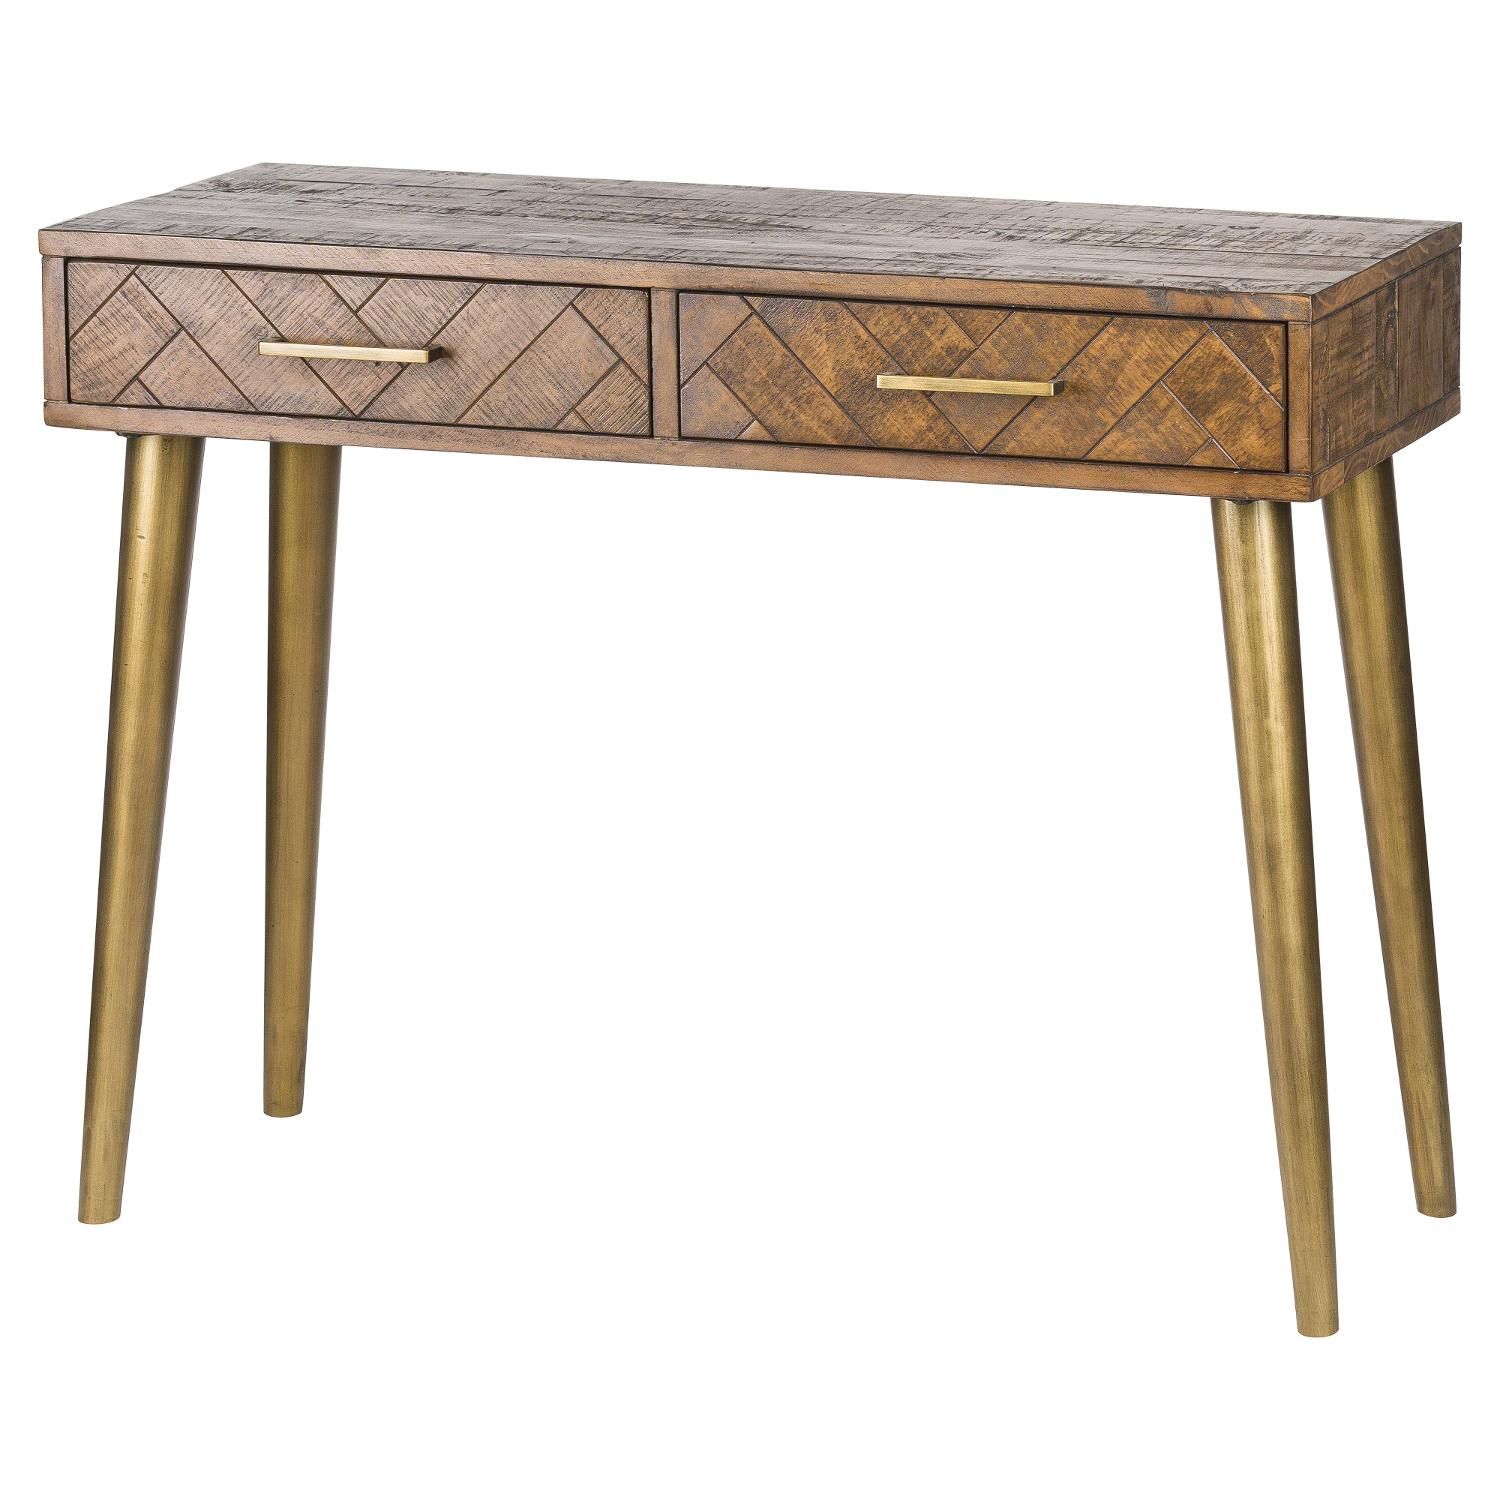 Havana Gold 2 Drawer Console Table | From Baytree Interiors For Antiqued Gold Rectangular Console Tables (View 10 of 20)